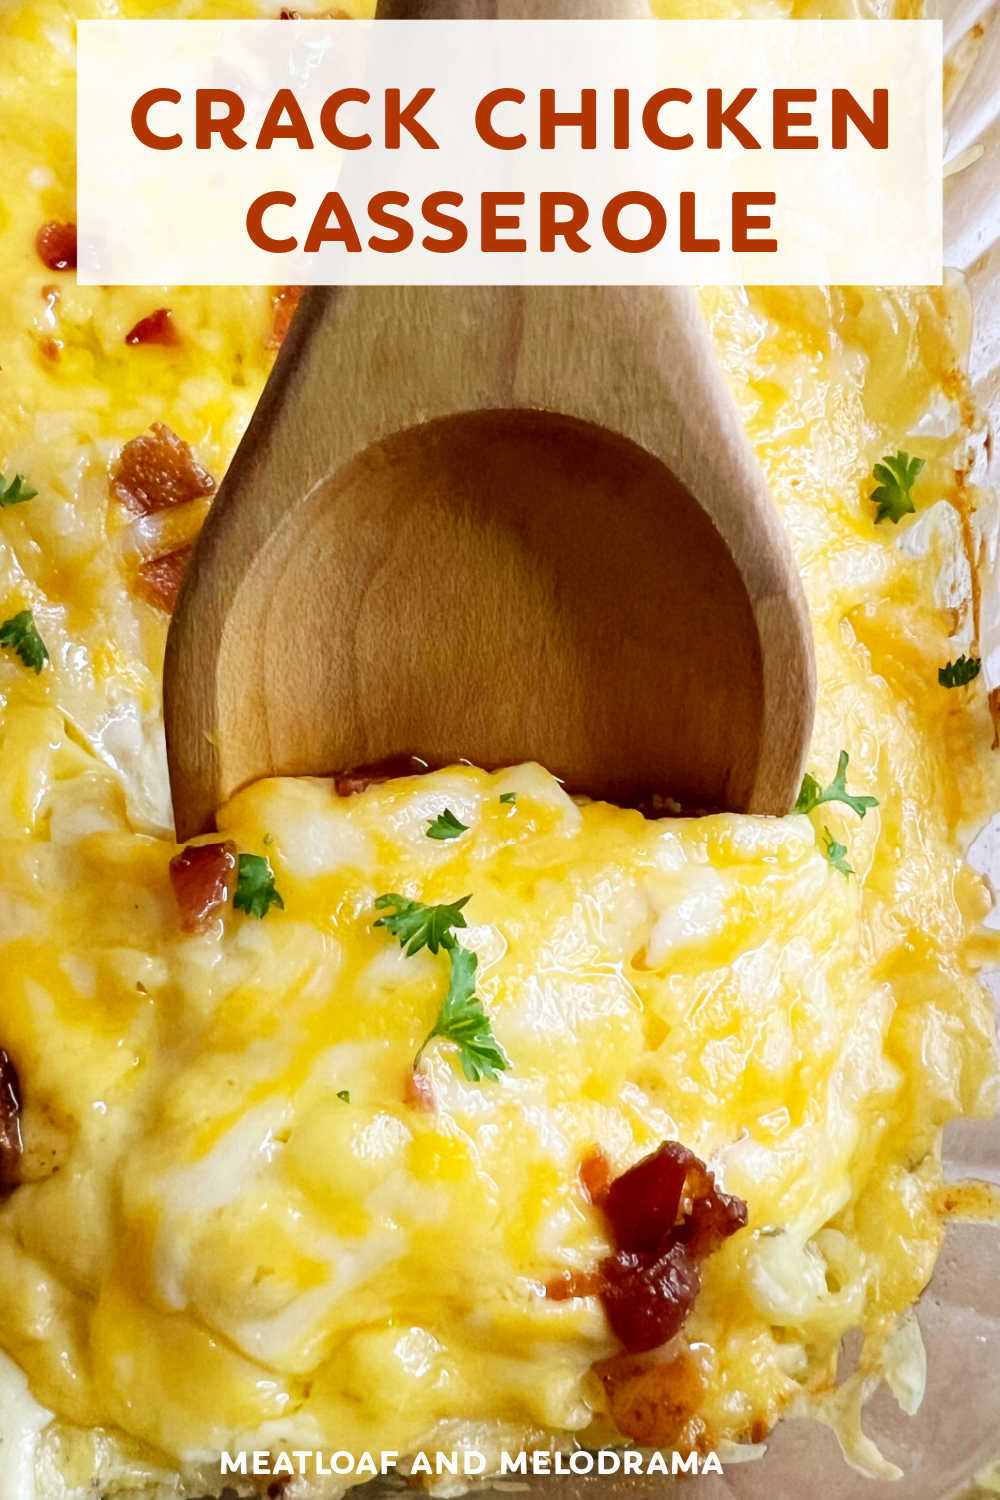 Crack Chicken Casserole is an easy recipe made with rotisserie chicken, cooked pasta, bacon and cheddar cheese in a creamy ranch sauce. A great recipe for busy weeknights and a delicious way to use up leftover chicken. via @meamel